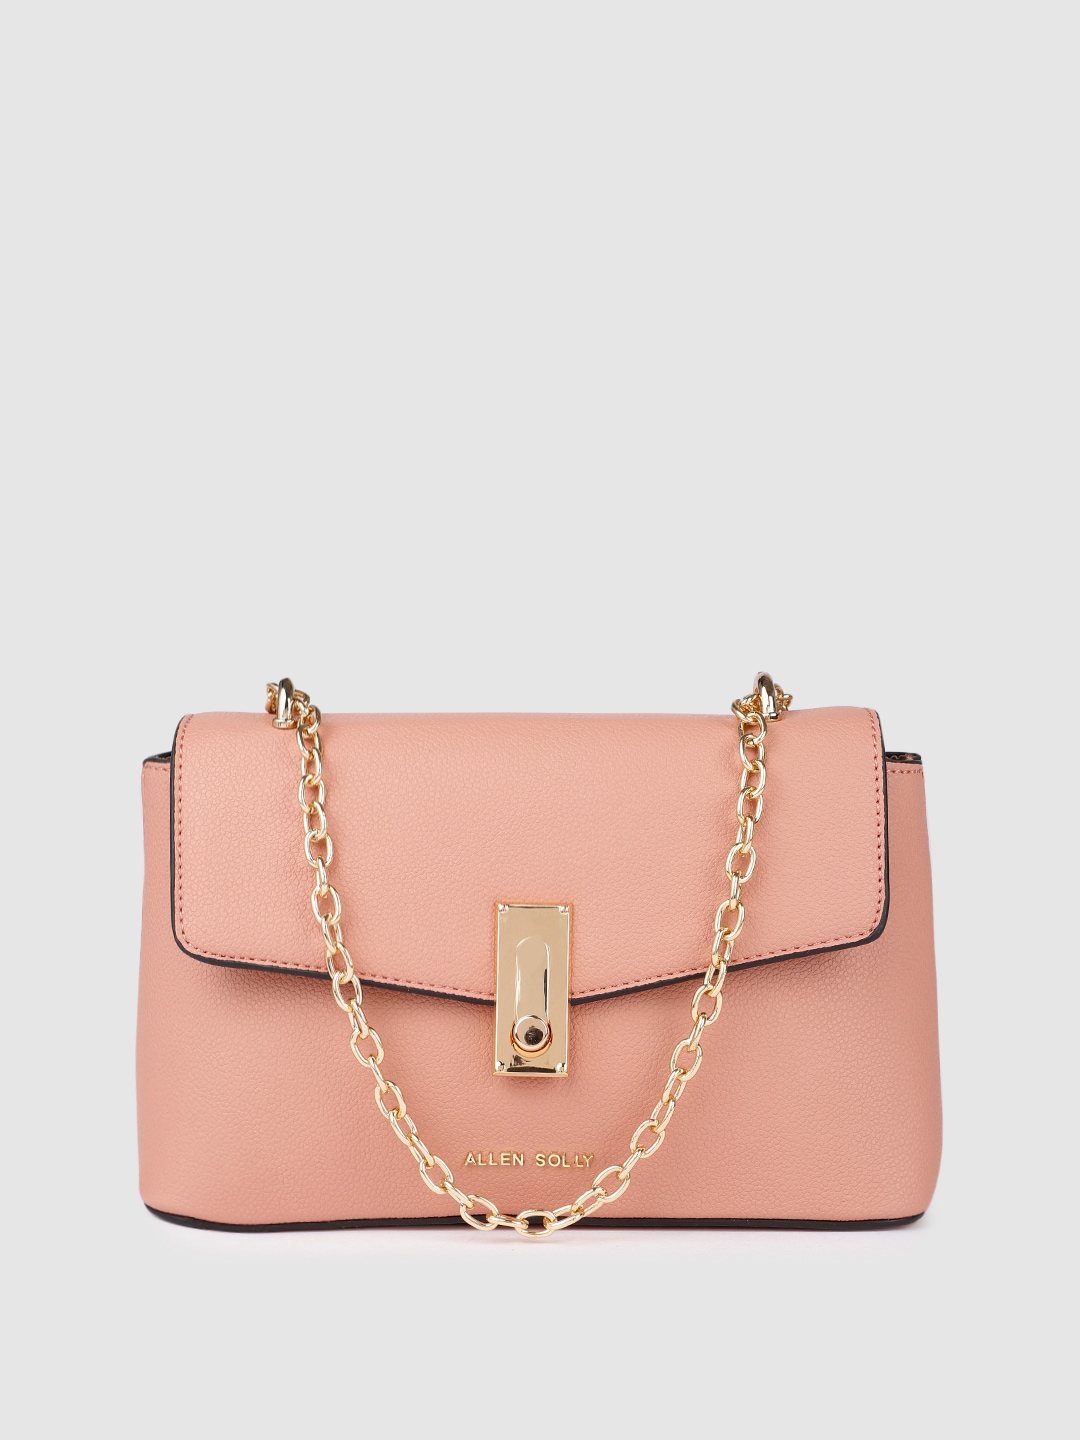 Allen Solly Peach-Coloured Solid Sling Bag Price in India